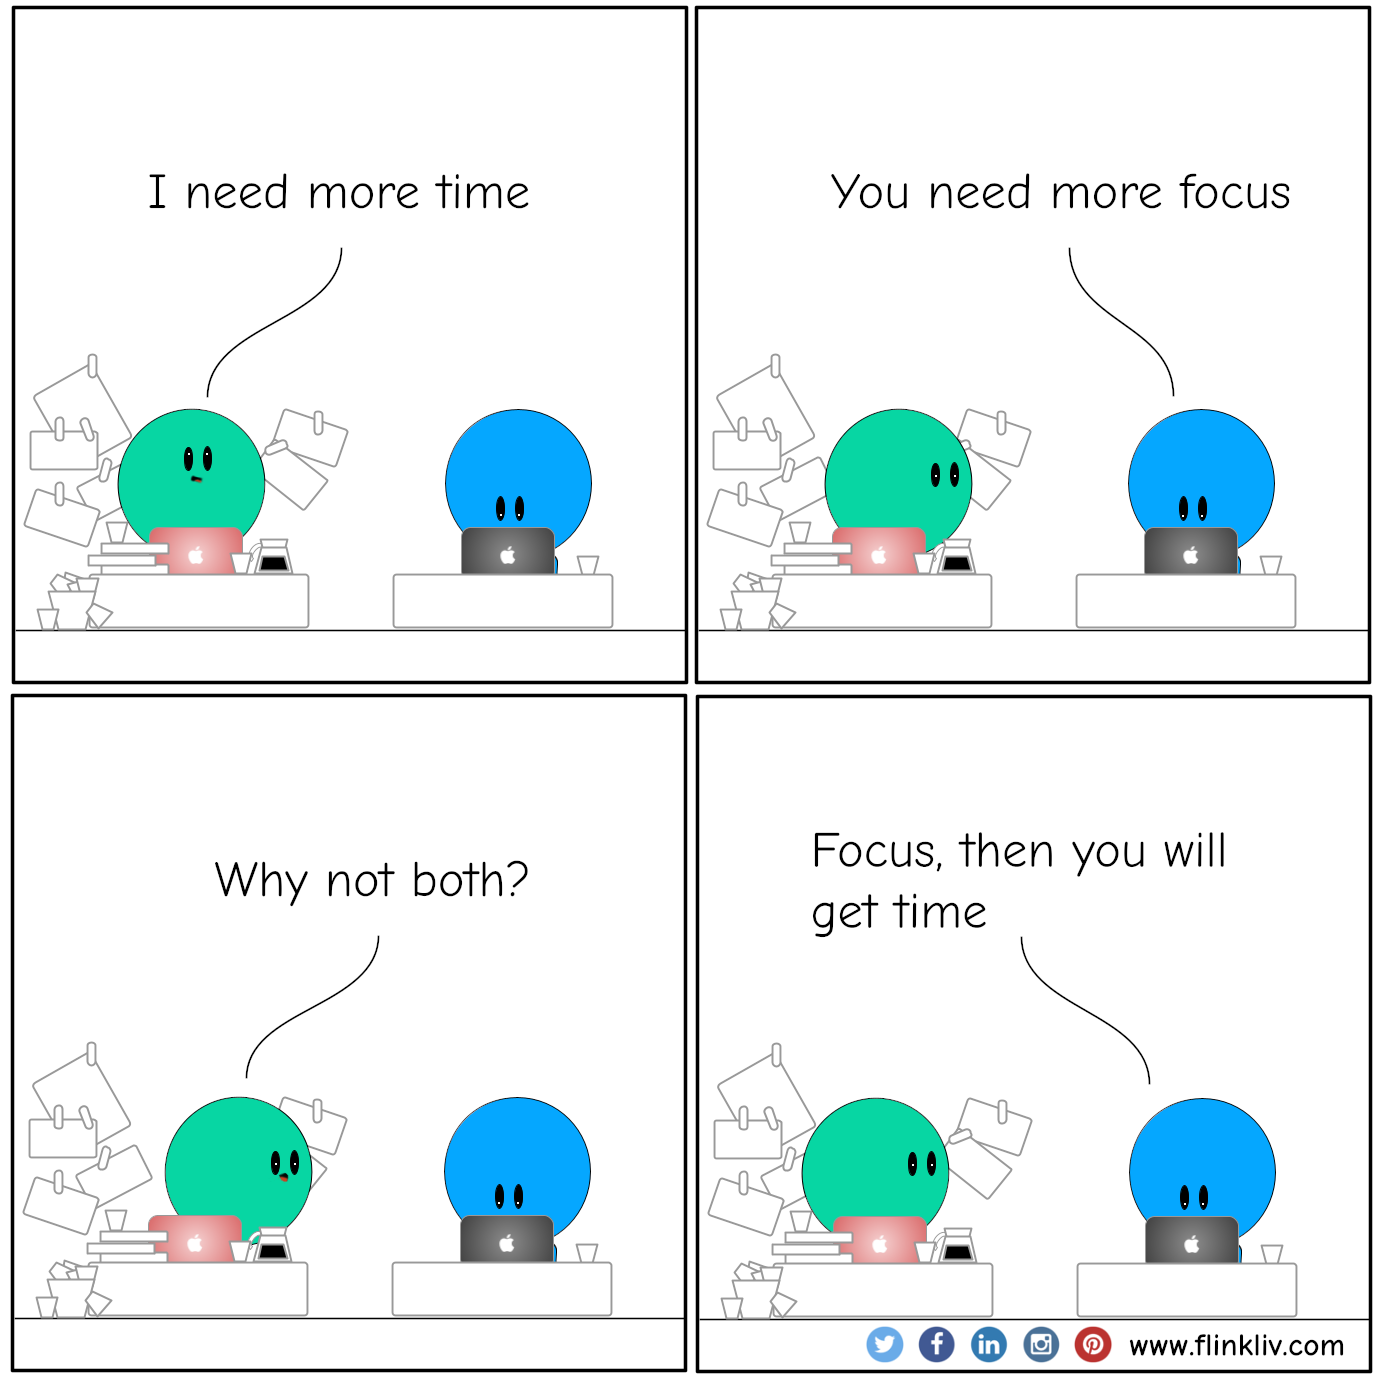 A conversation between A and B about how to do things A: I need more time B: You need more focus A: Why not both? B: Focus, then you will get time. By flinkliv.com